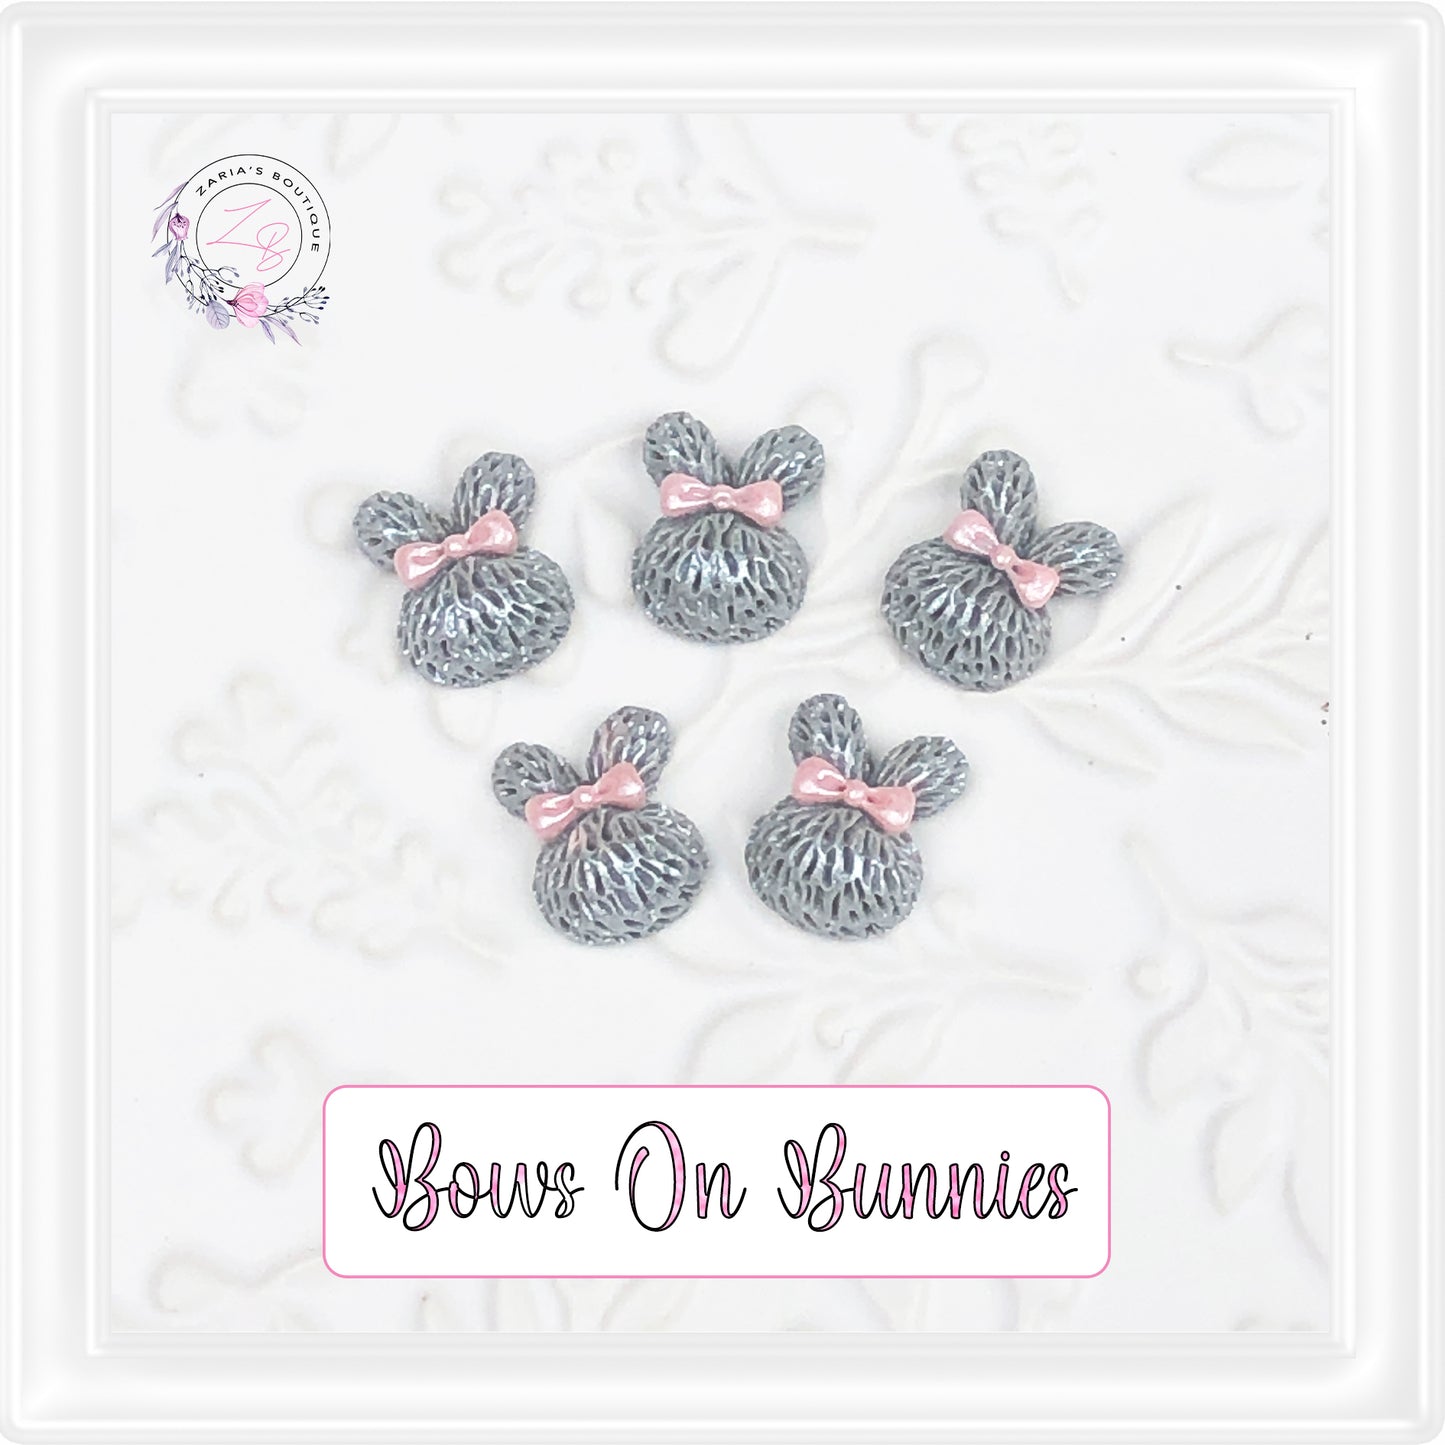 ⋅ Bows On Bunnies ⋅ Flat Back Cabochon Resin Embellishments ⋅ 5 pieces ⋅